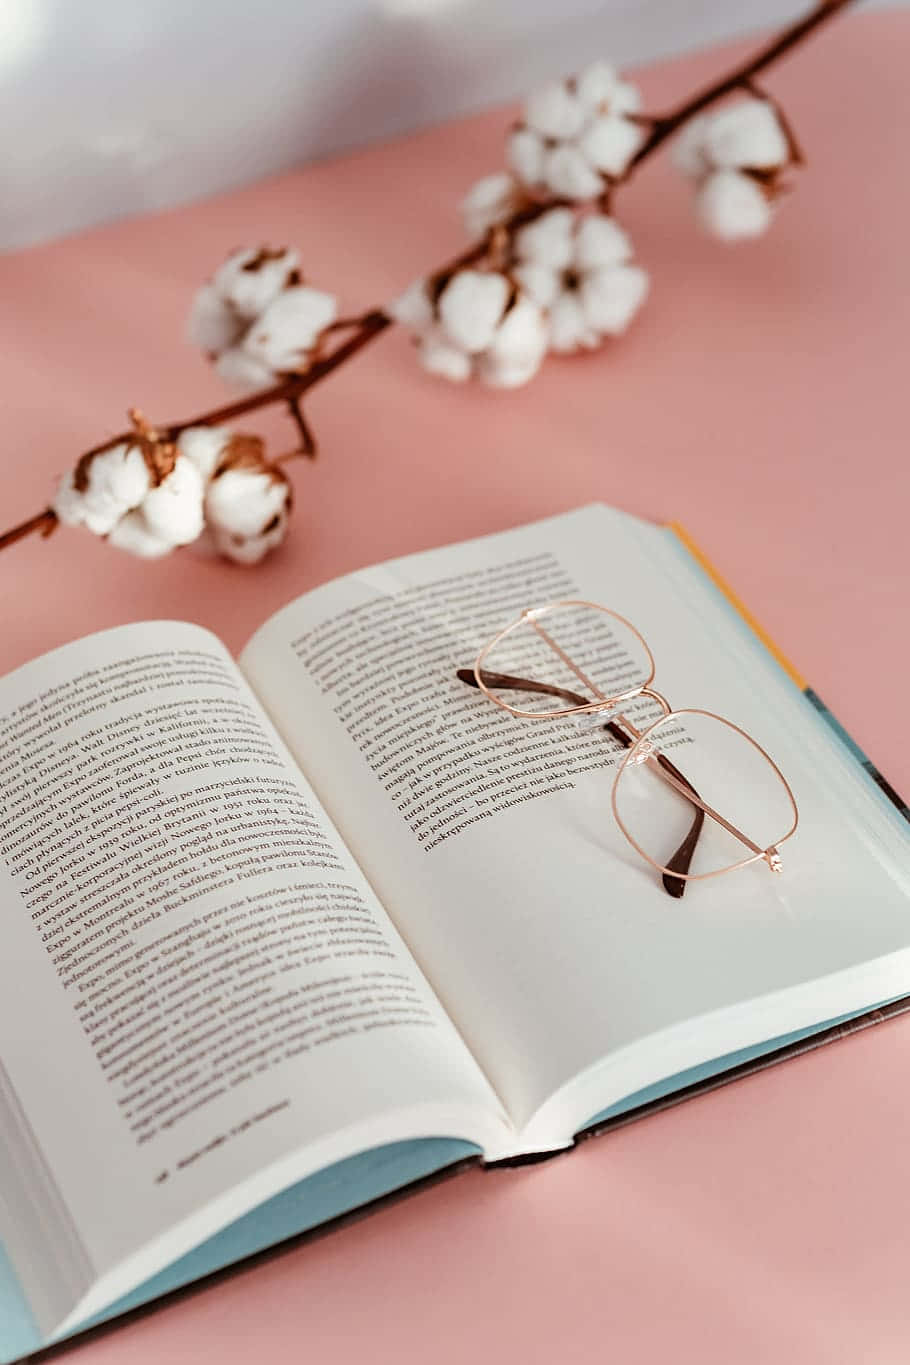 Cotton Branches And Glasses On Book.jpg Wallpaper